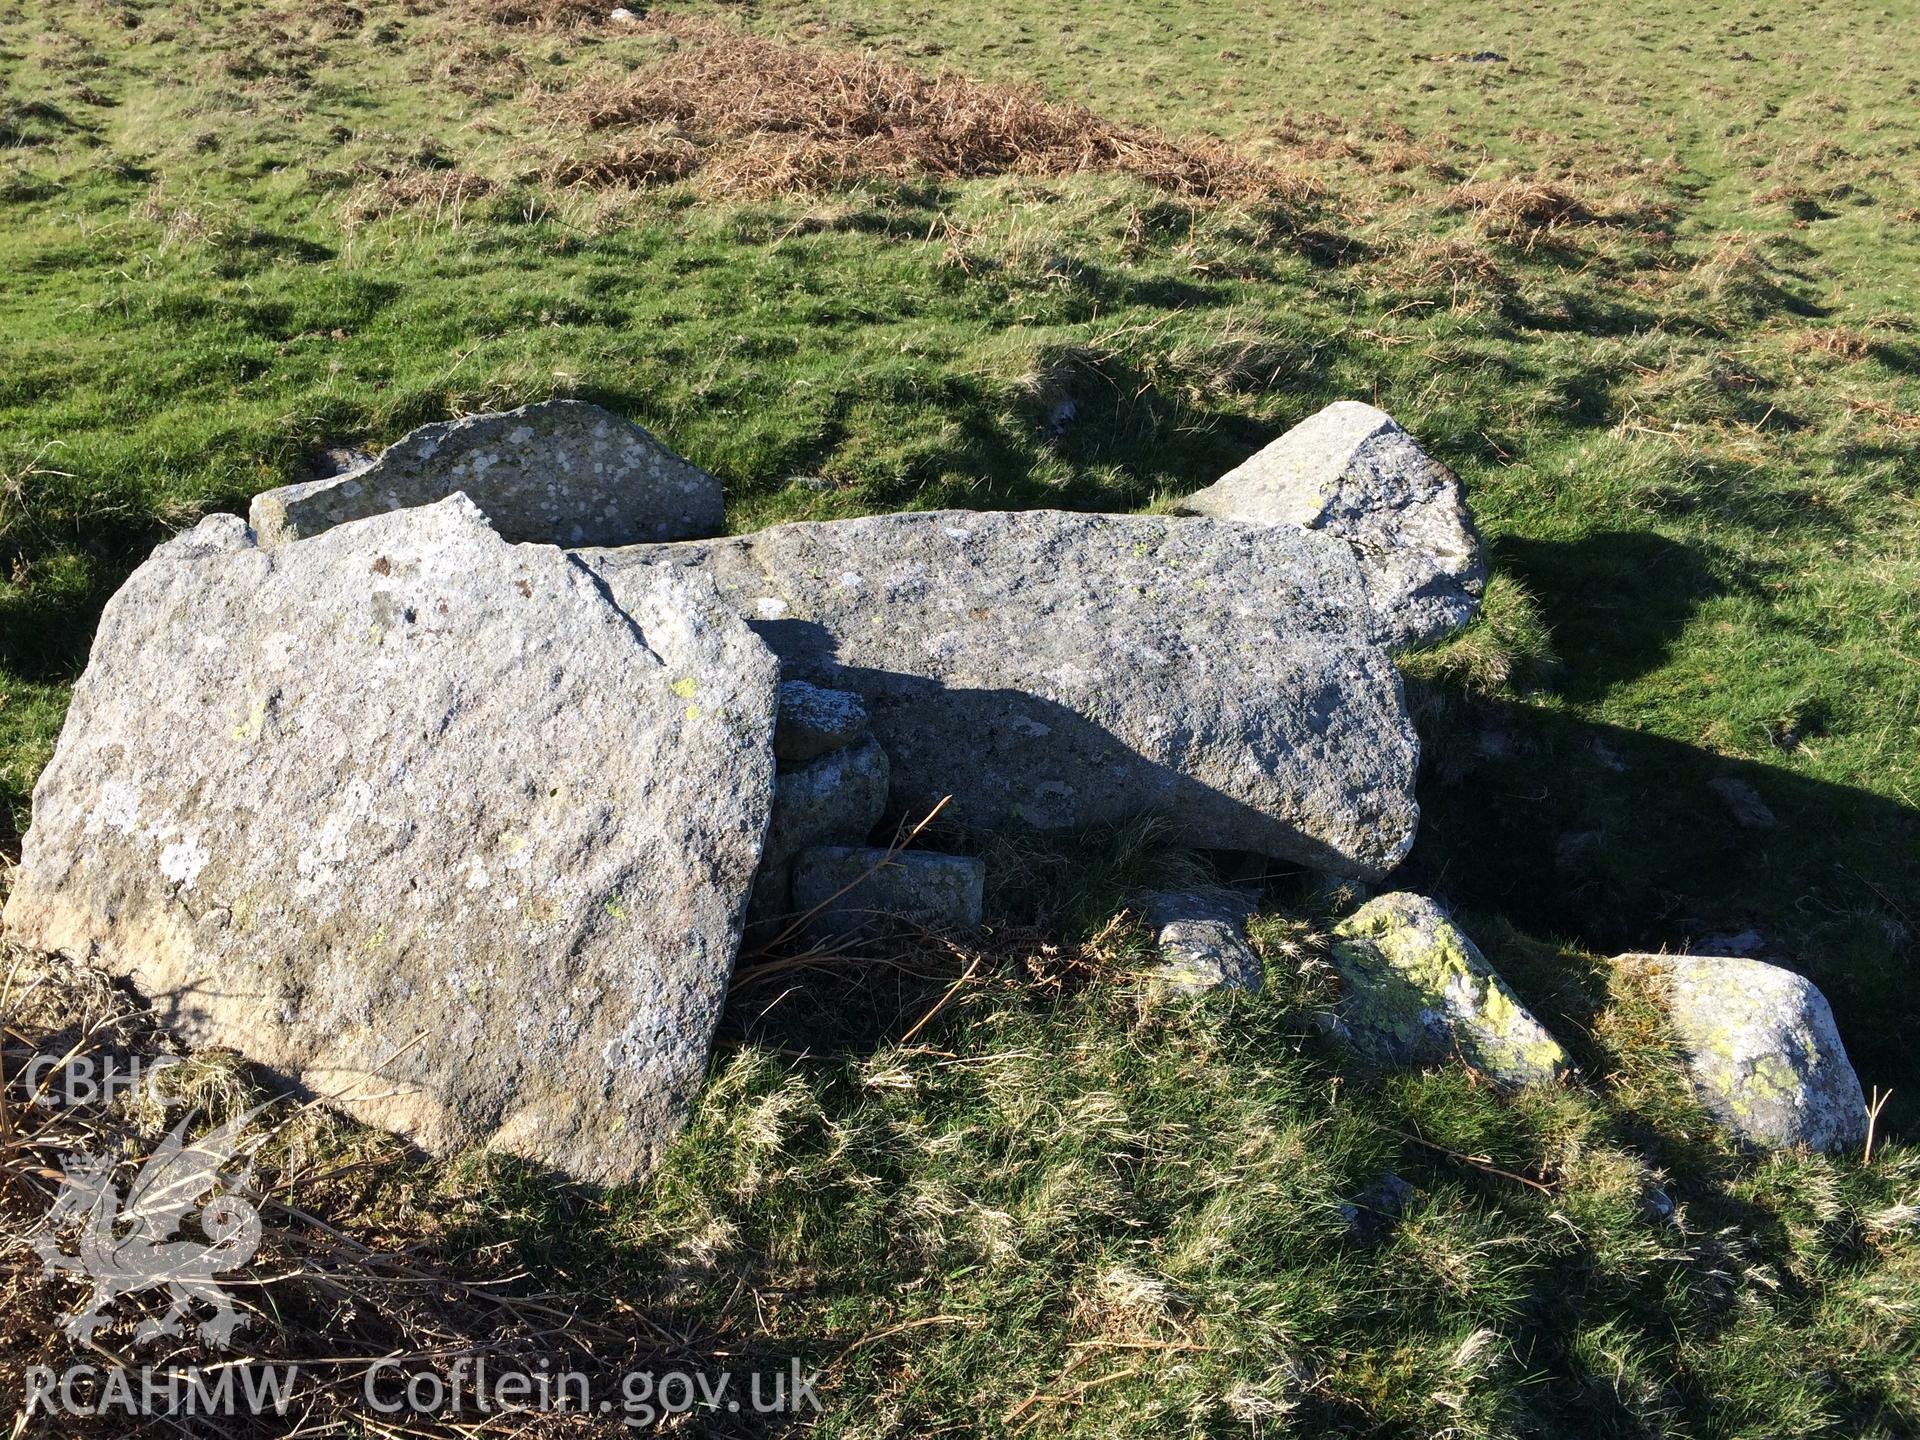 Colour photo showing burial chamber near Maen y Bardd,  produced by Paul R. Davis,  8th April 2017.